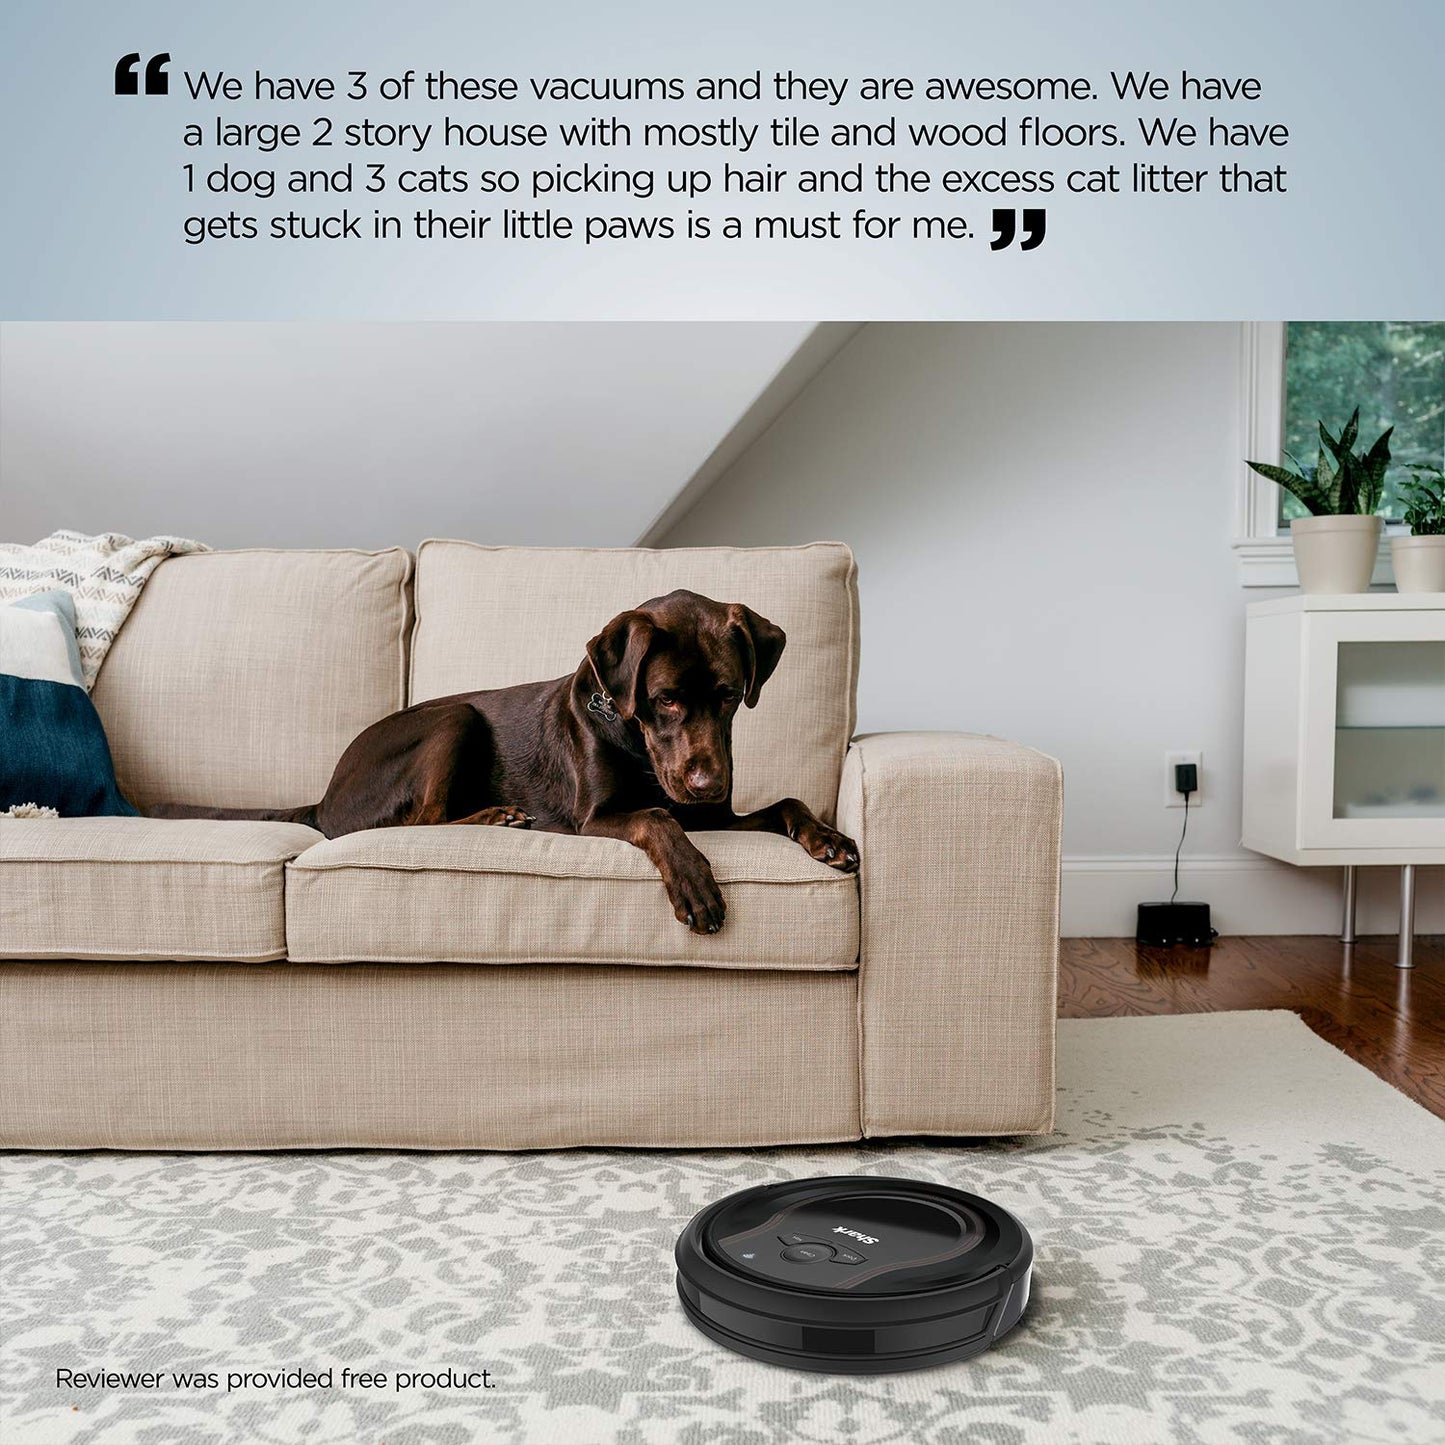 Vacuum Robot Wi-Fi Connected with Alexa Long Runtime Black